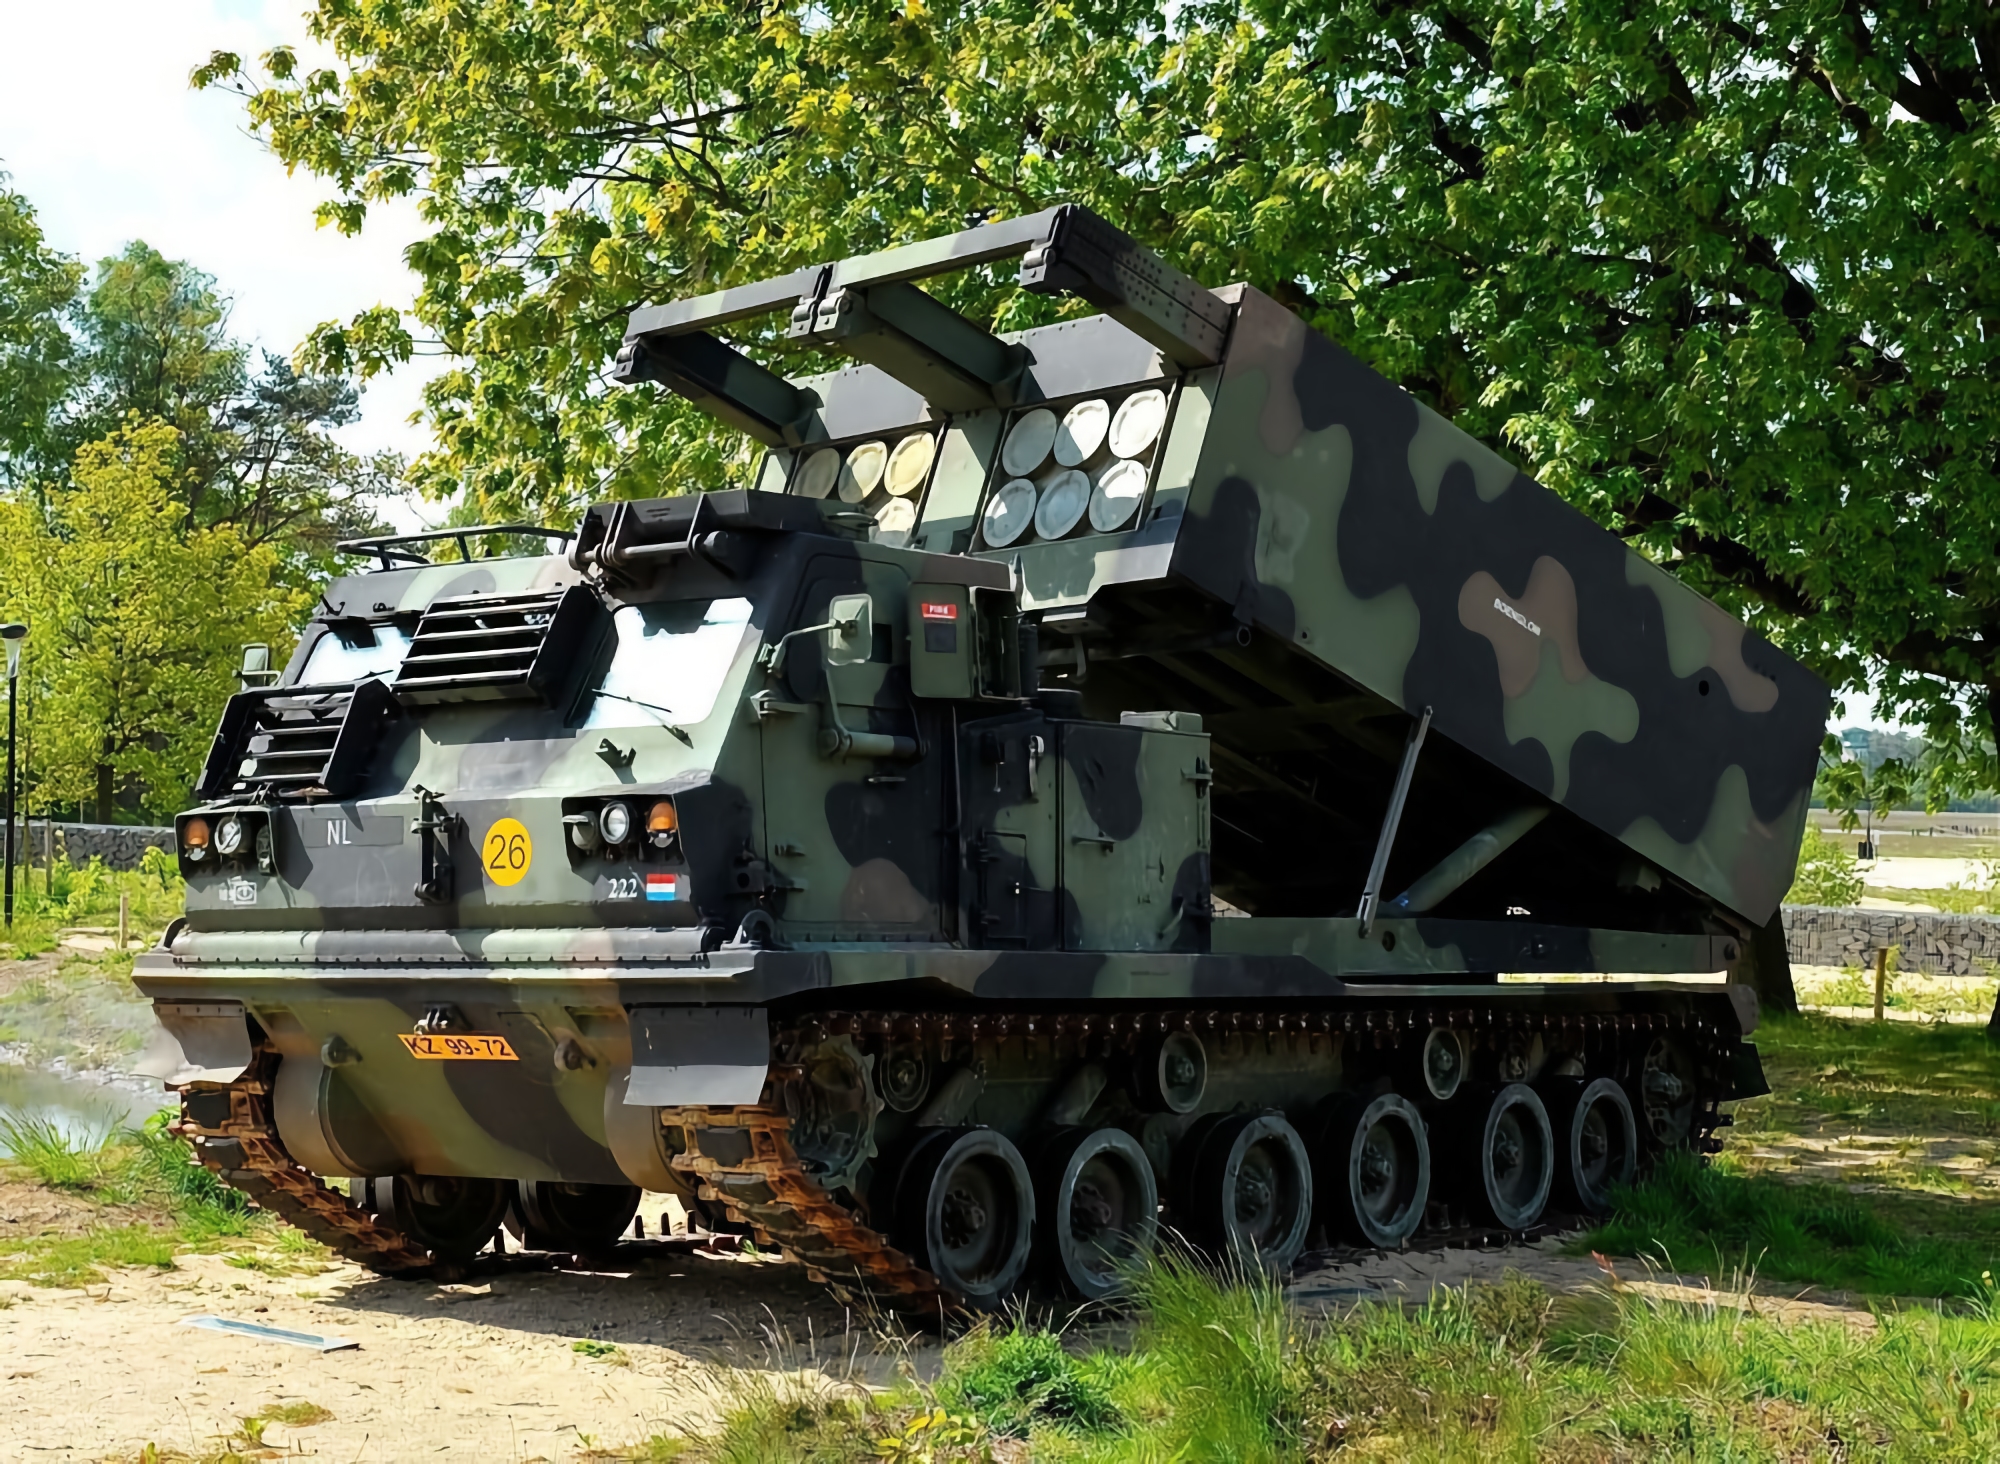 France transfers three LRU multiple-launch rocket systems to Ukraine - a modified version of the M270